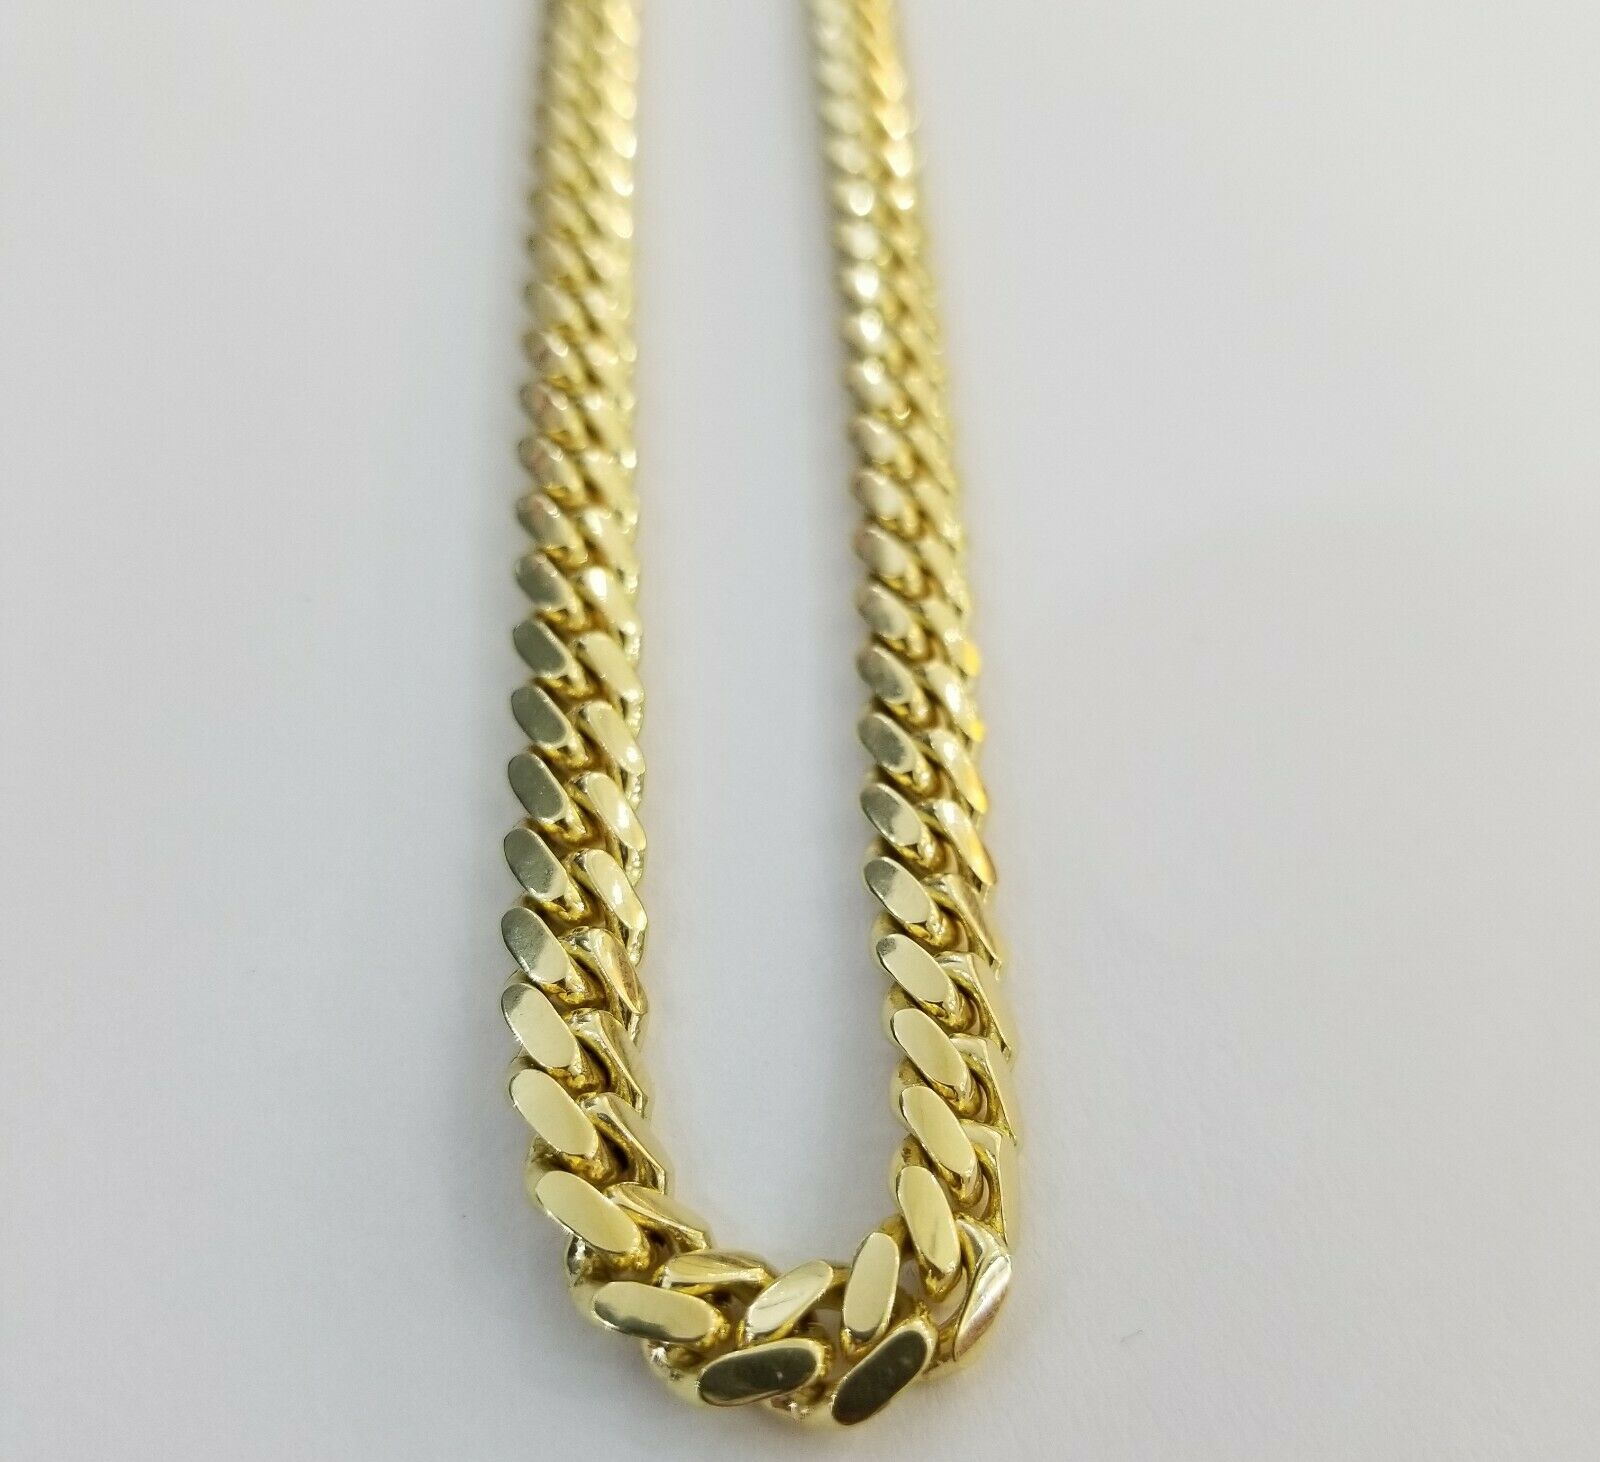 Solid 14k Gold Chain Necklace 22